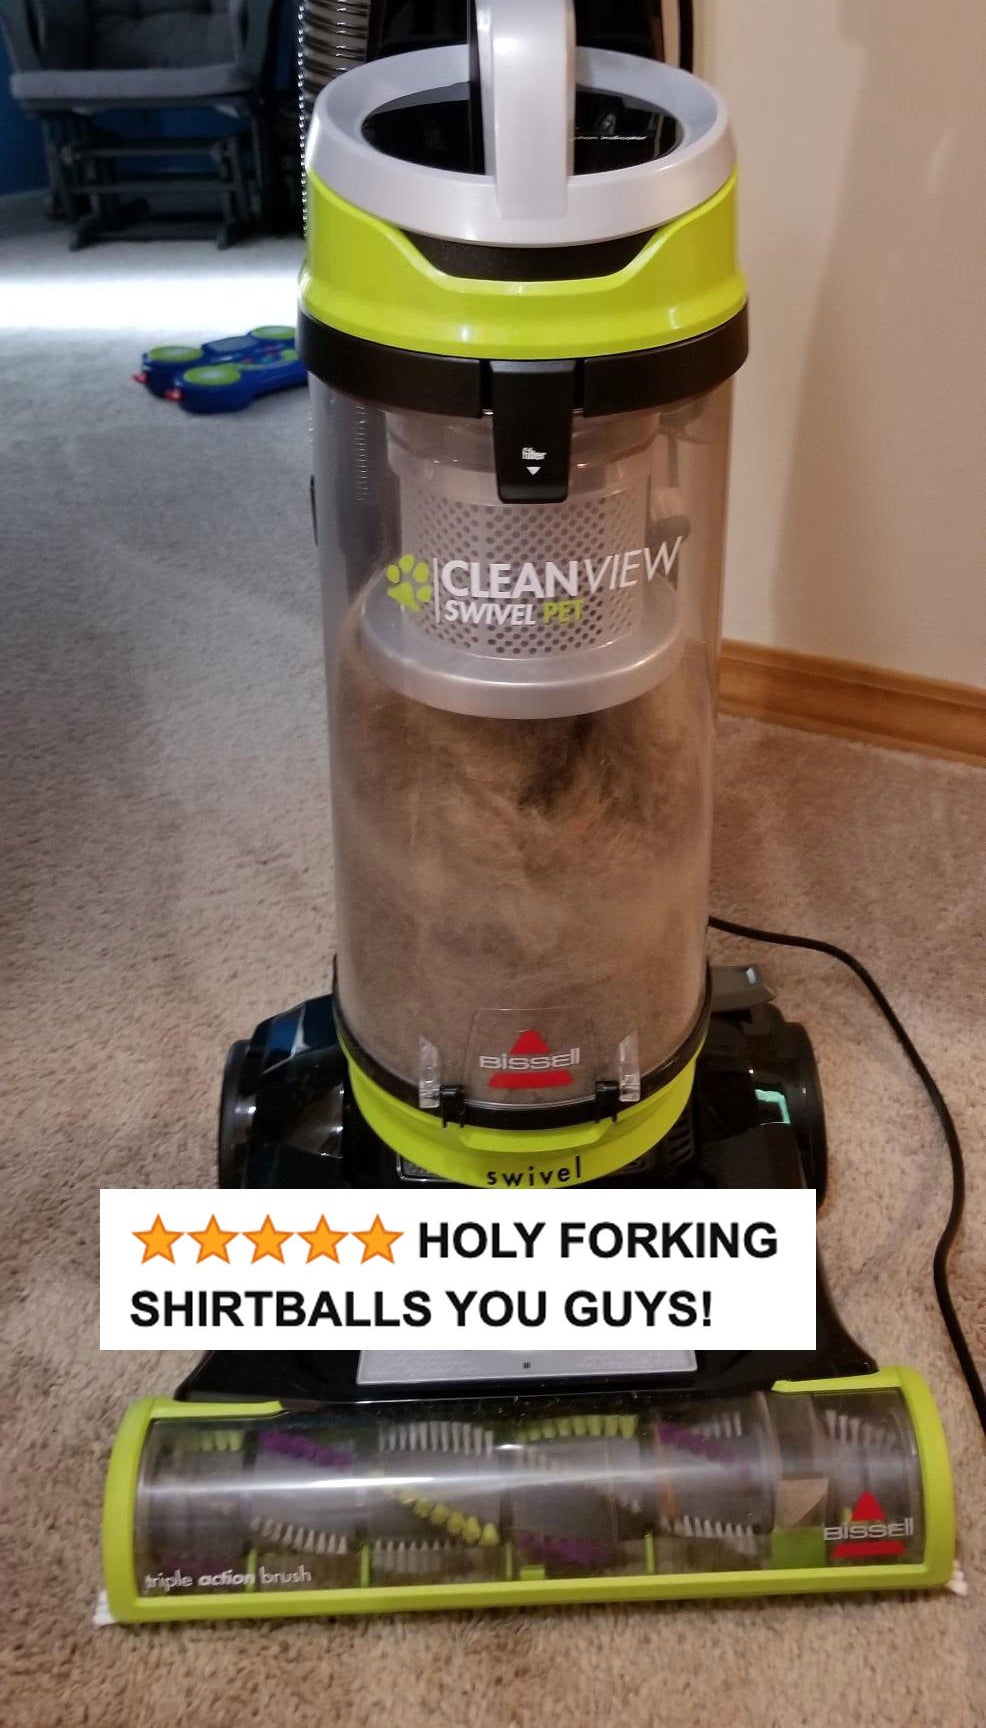 The vacuum filled with pet hair and dust with five stars and review text &quot;holy forking shirtballs you guys!&quot;